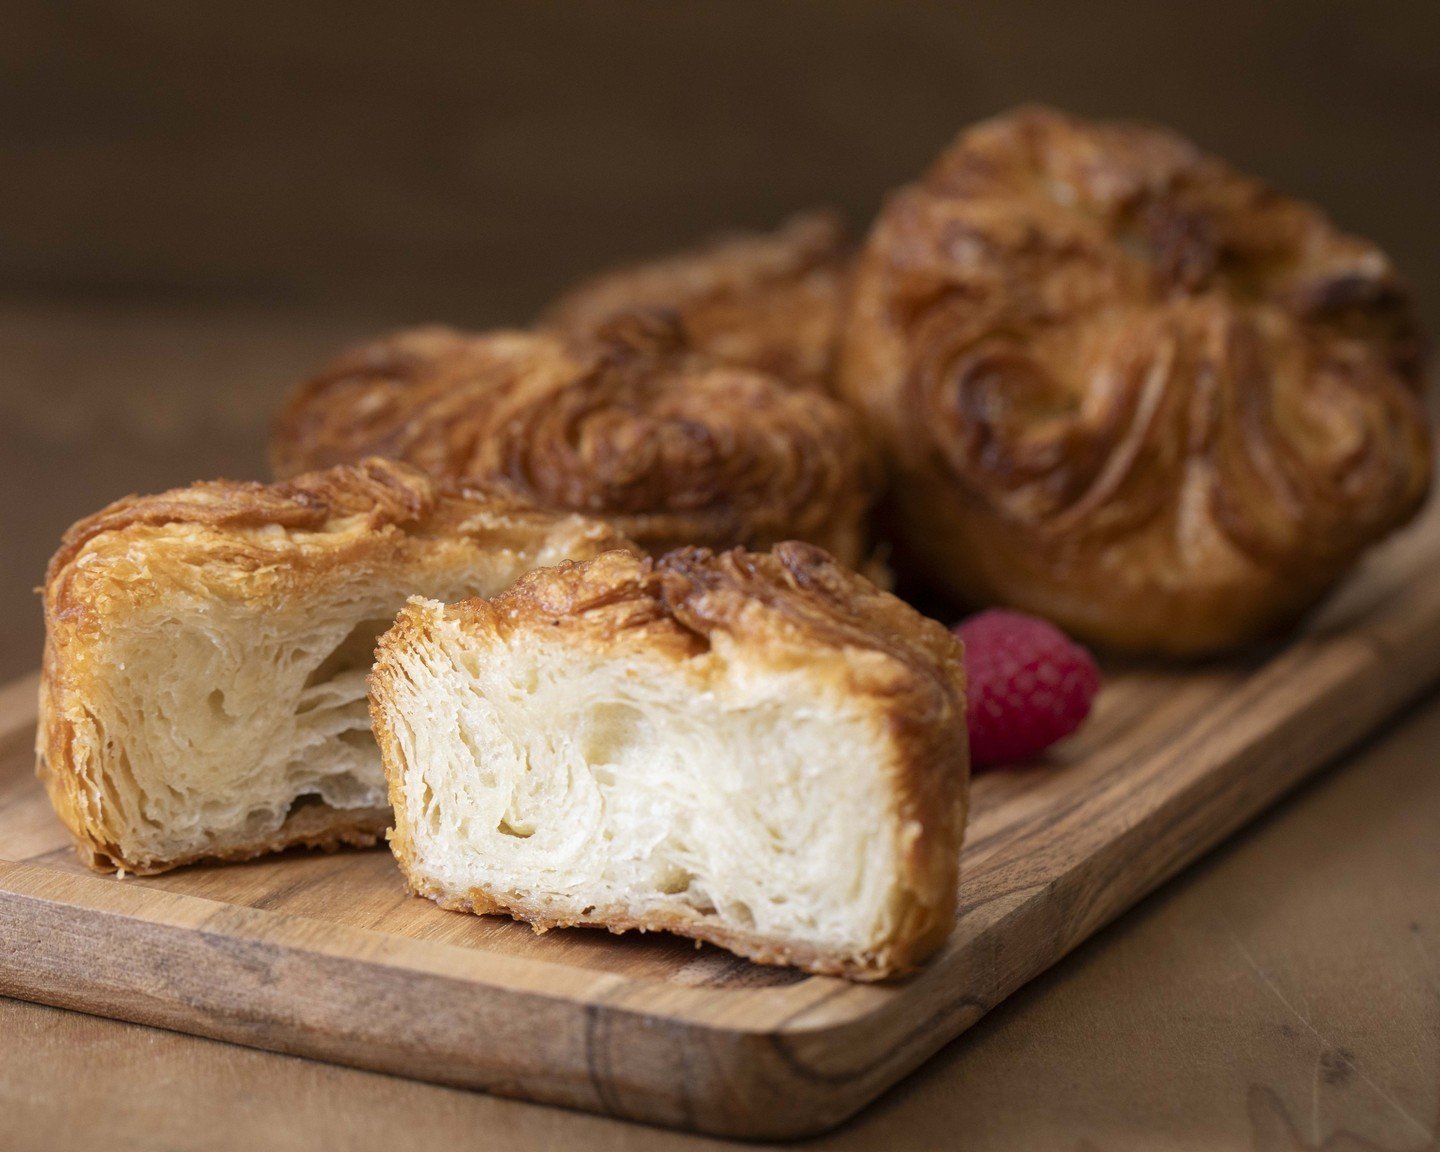 Craving something divine? Look no further than our mouthwatering Kouign Amann! Buttery, flaky, sweet, and oh-so-delicious, it is the perfect pastry pick-me-up for any time of day. Go ahead, treat yourself!